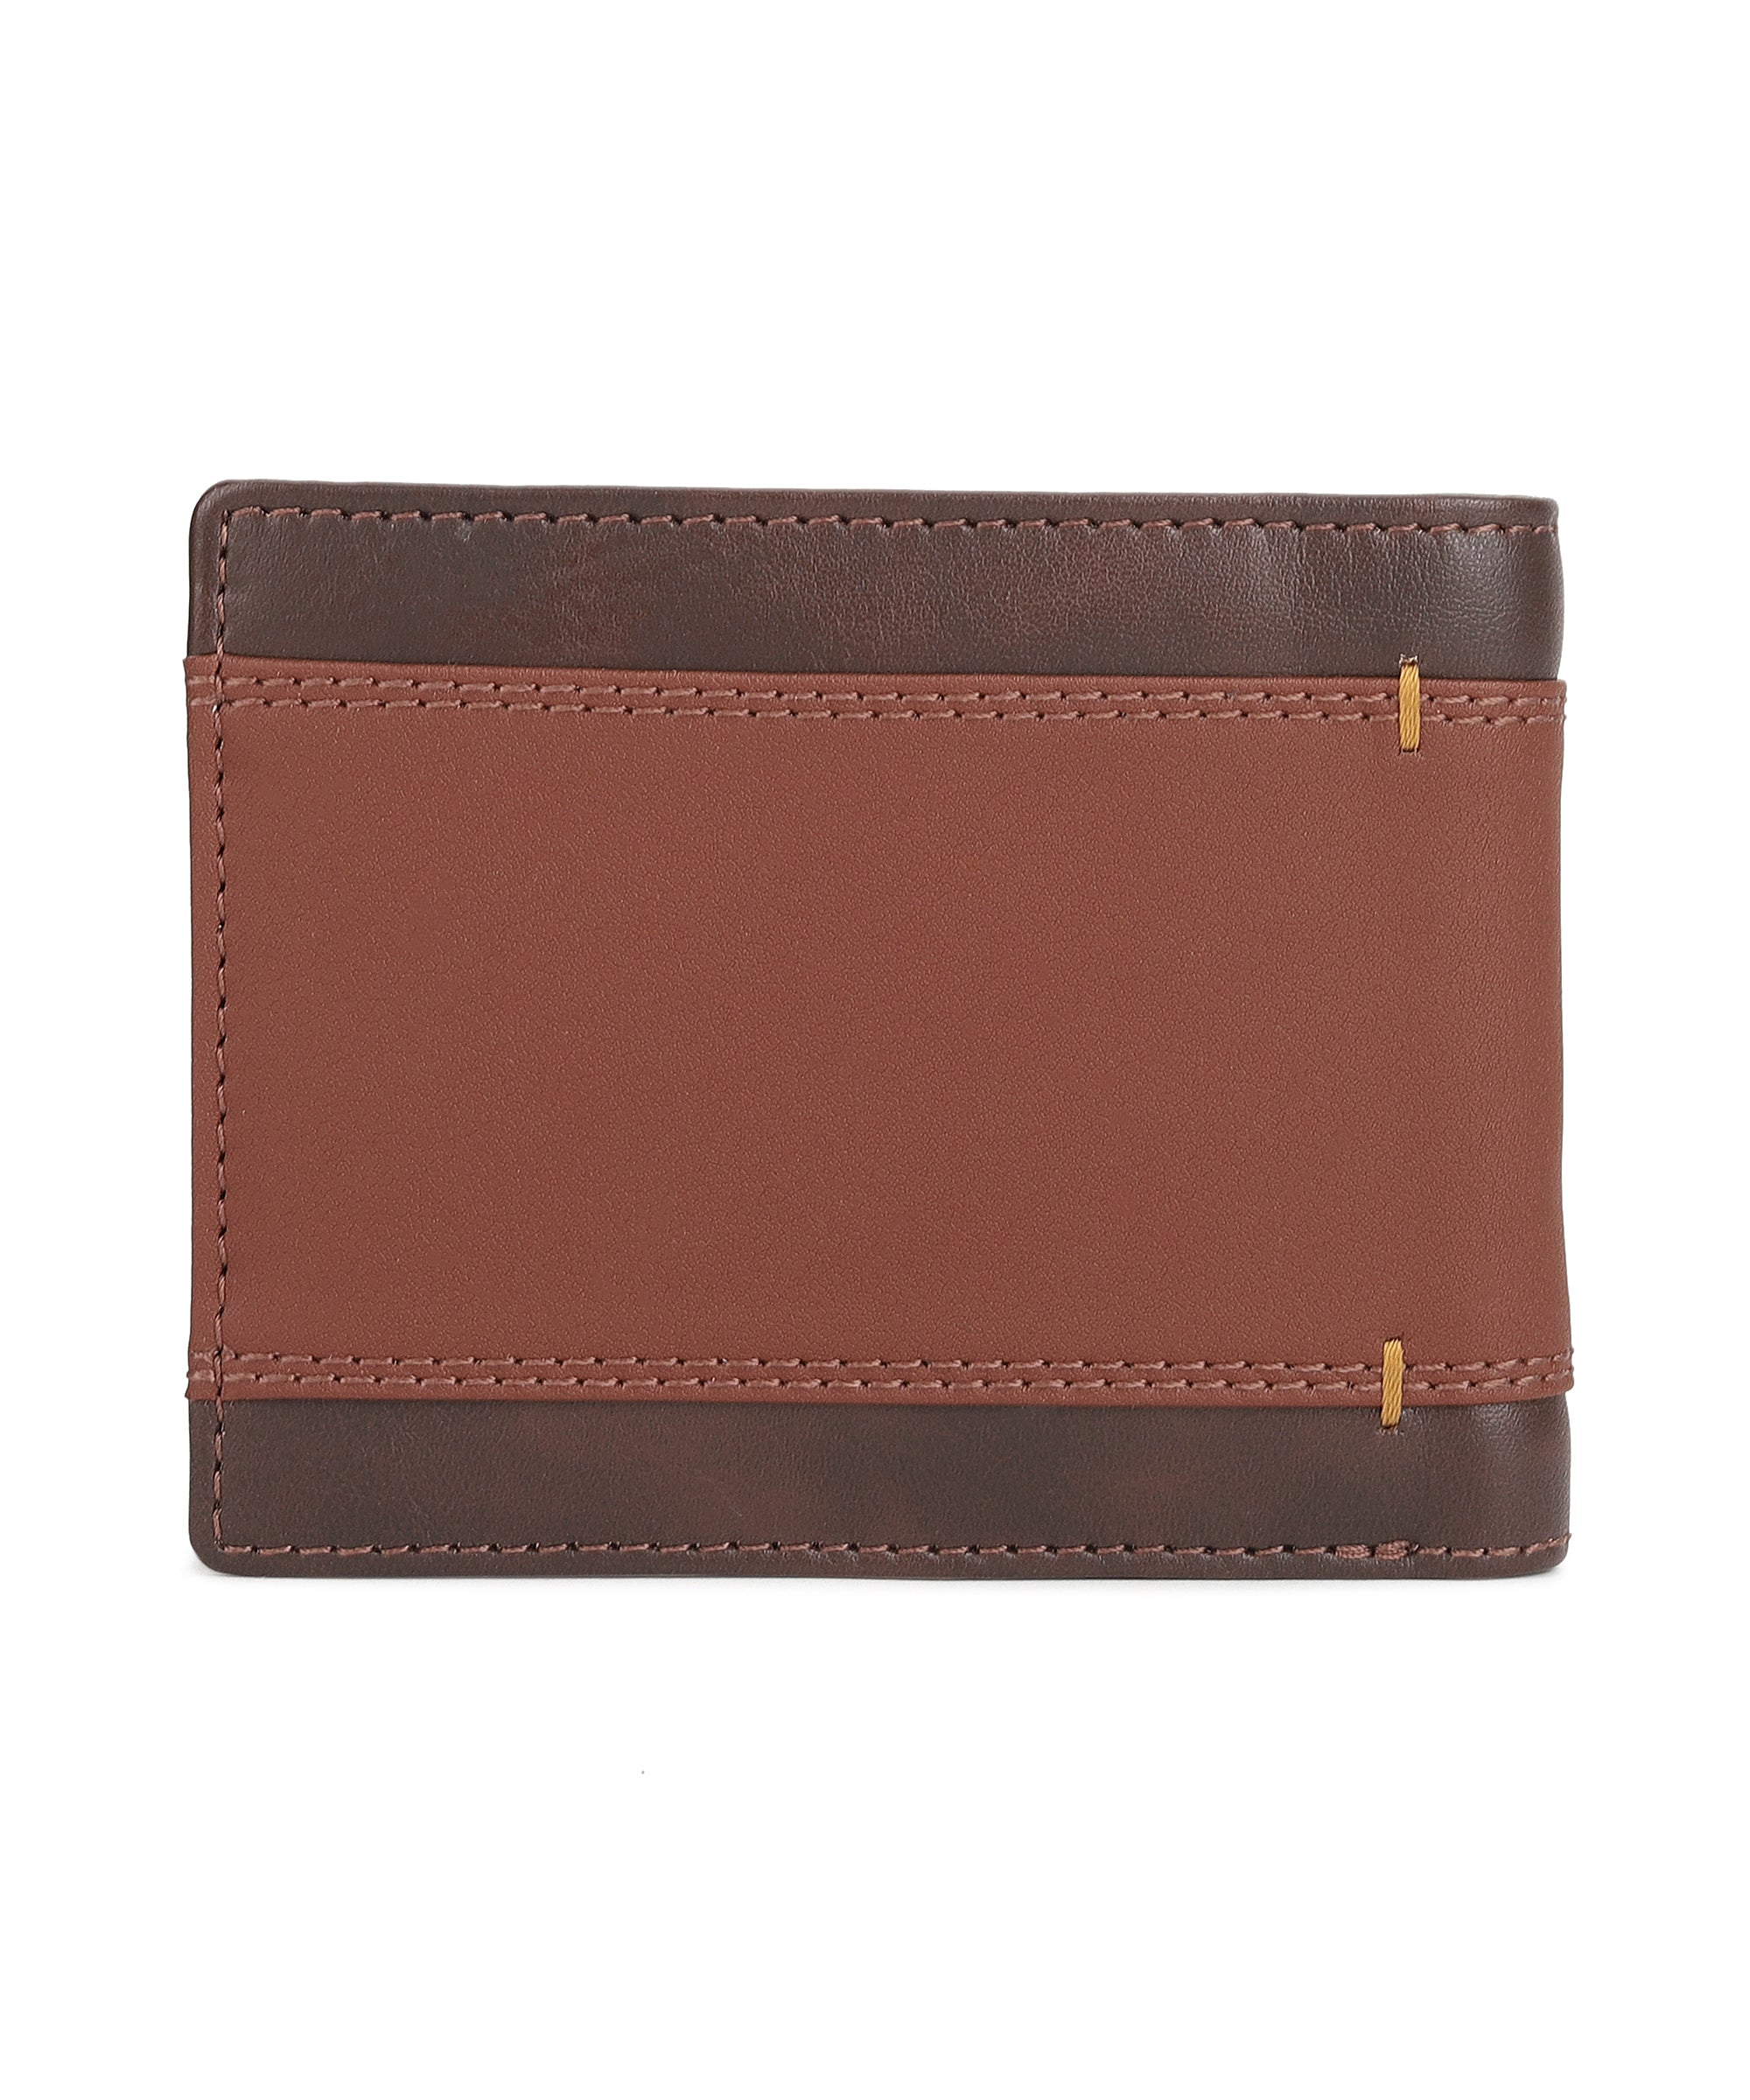 Urbano Fashion Men's Brown Casual, Formal Leather Wallet-6 Card Slots